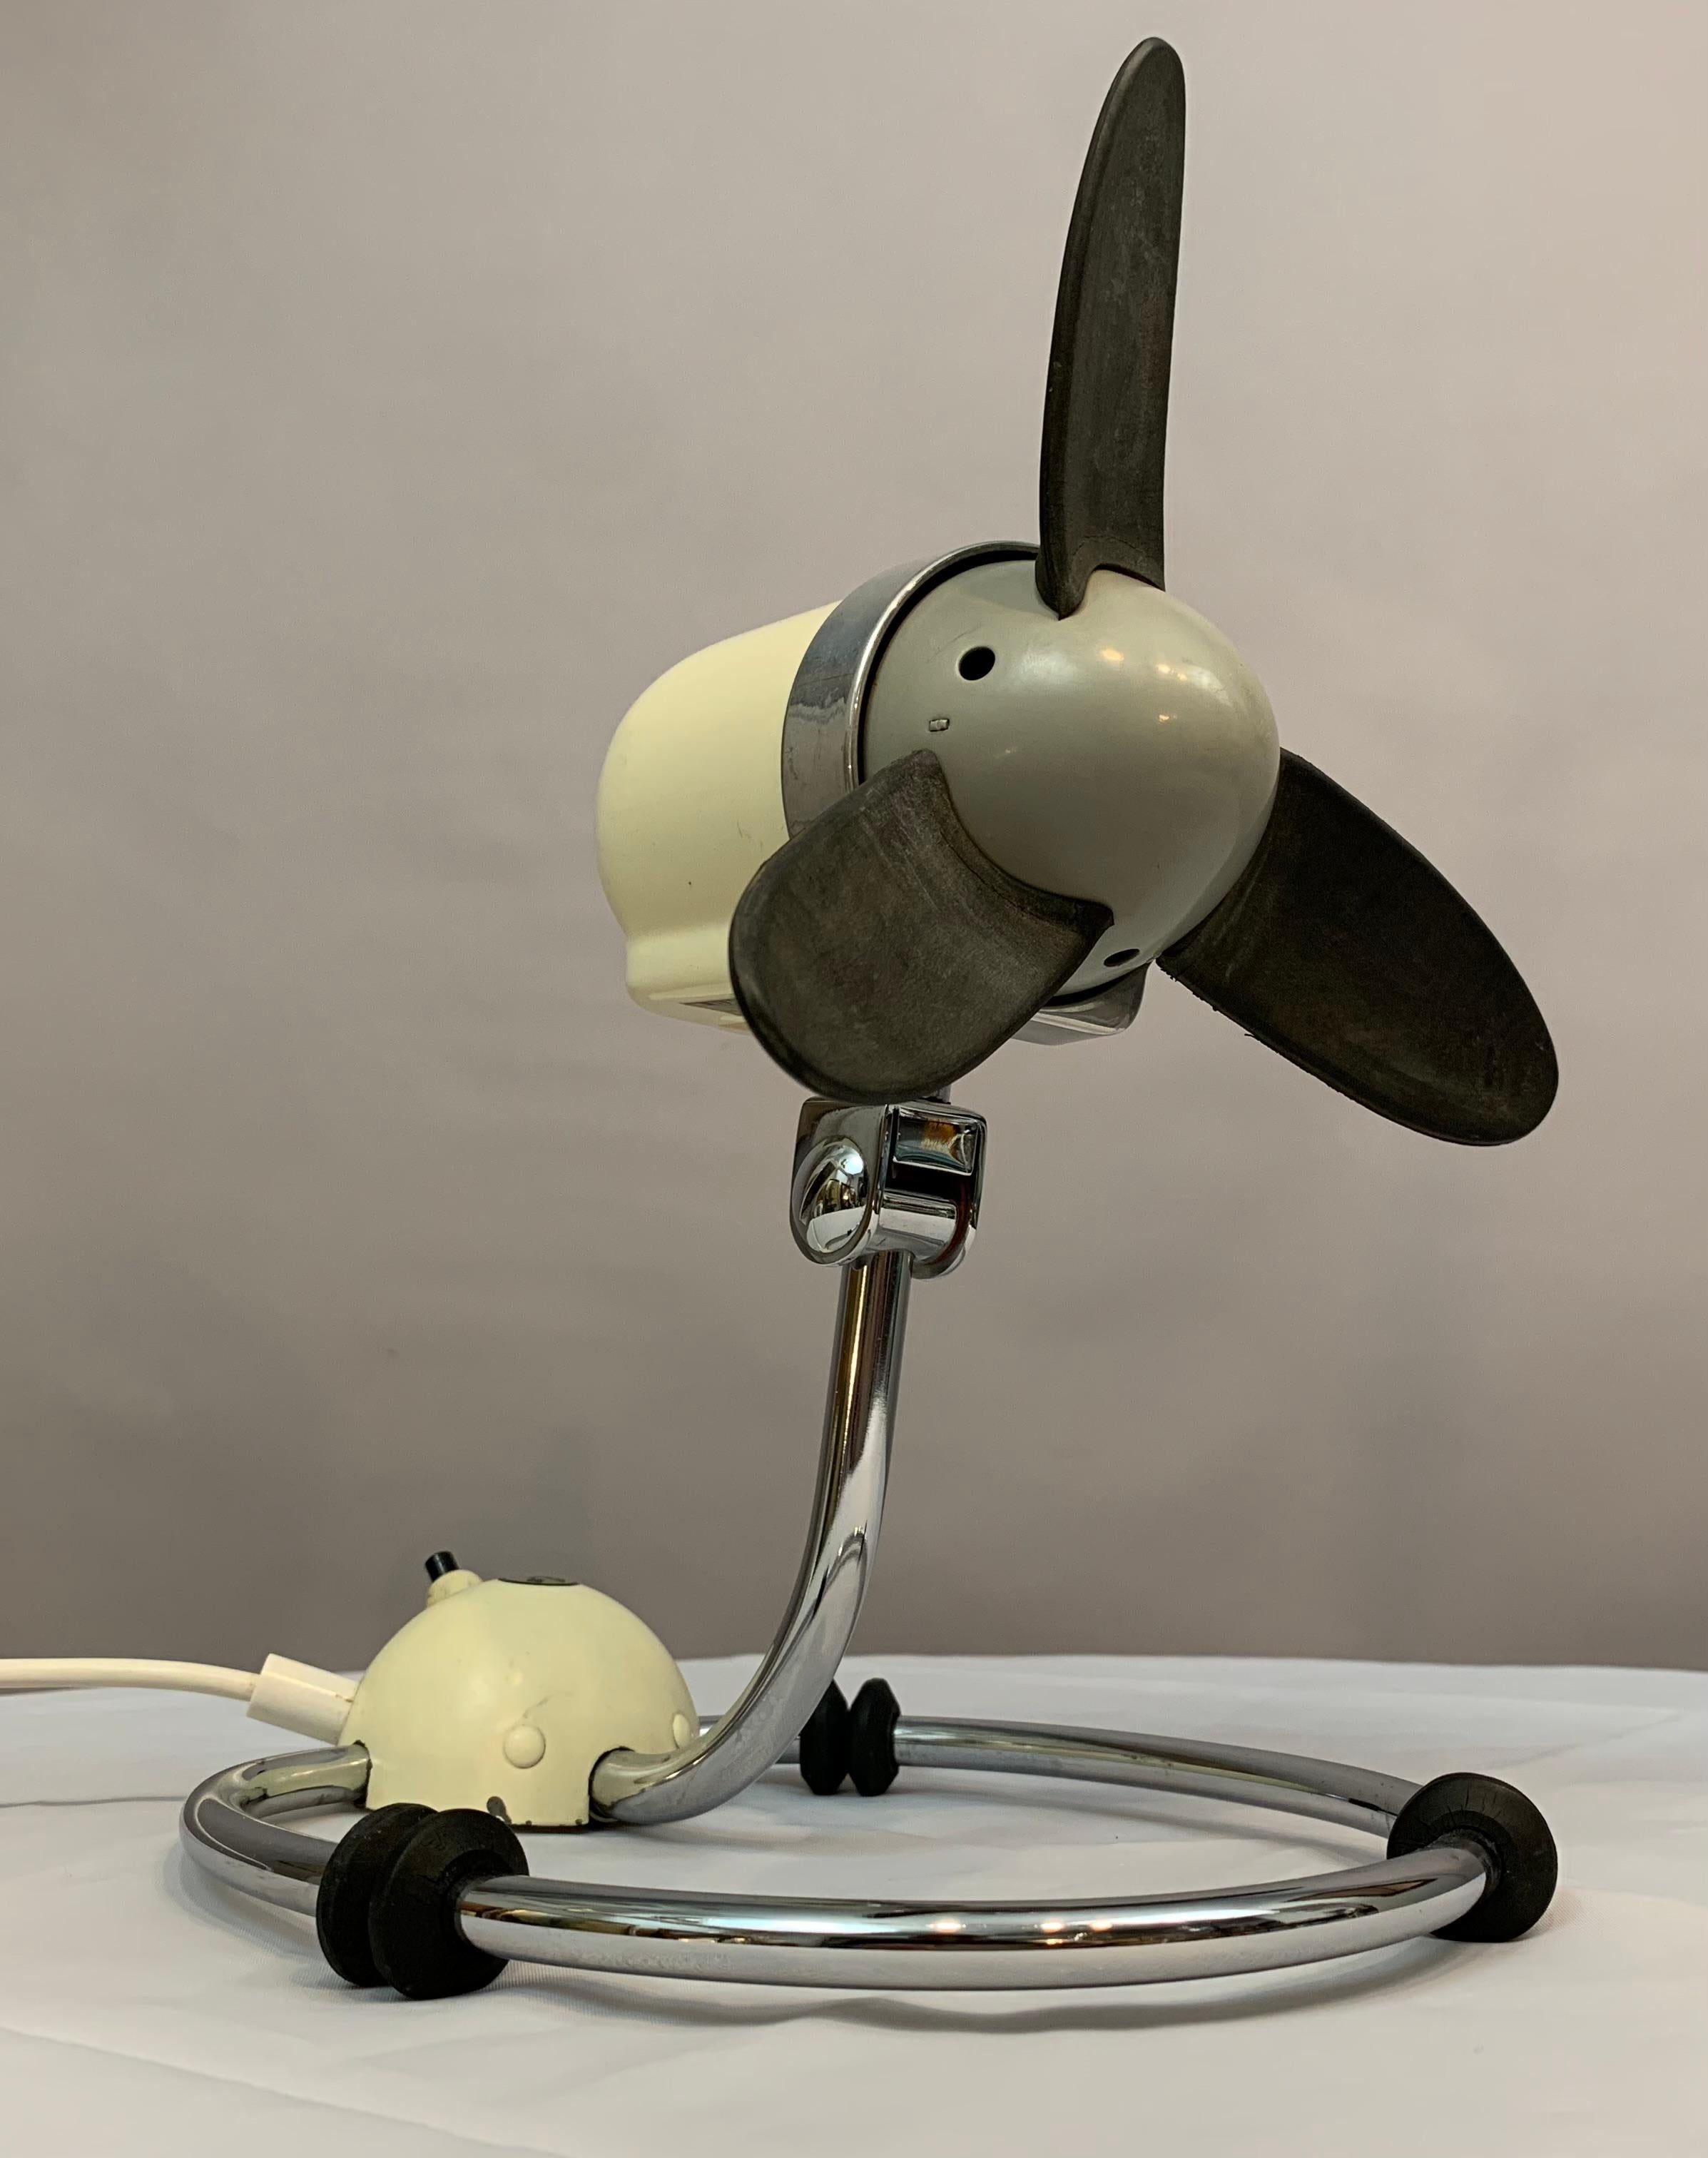 1960s German industrial freestanding desk fan manufactured by AS Industrial. An incredibly well-made and fully functioning lamp which will help to keep you cool on those hot days. The propellor section can be moved from right to left and up and down